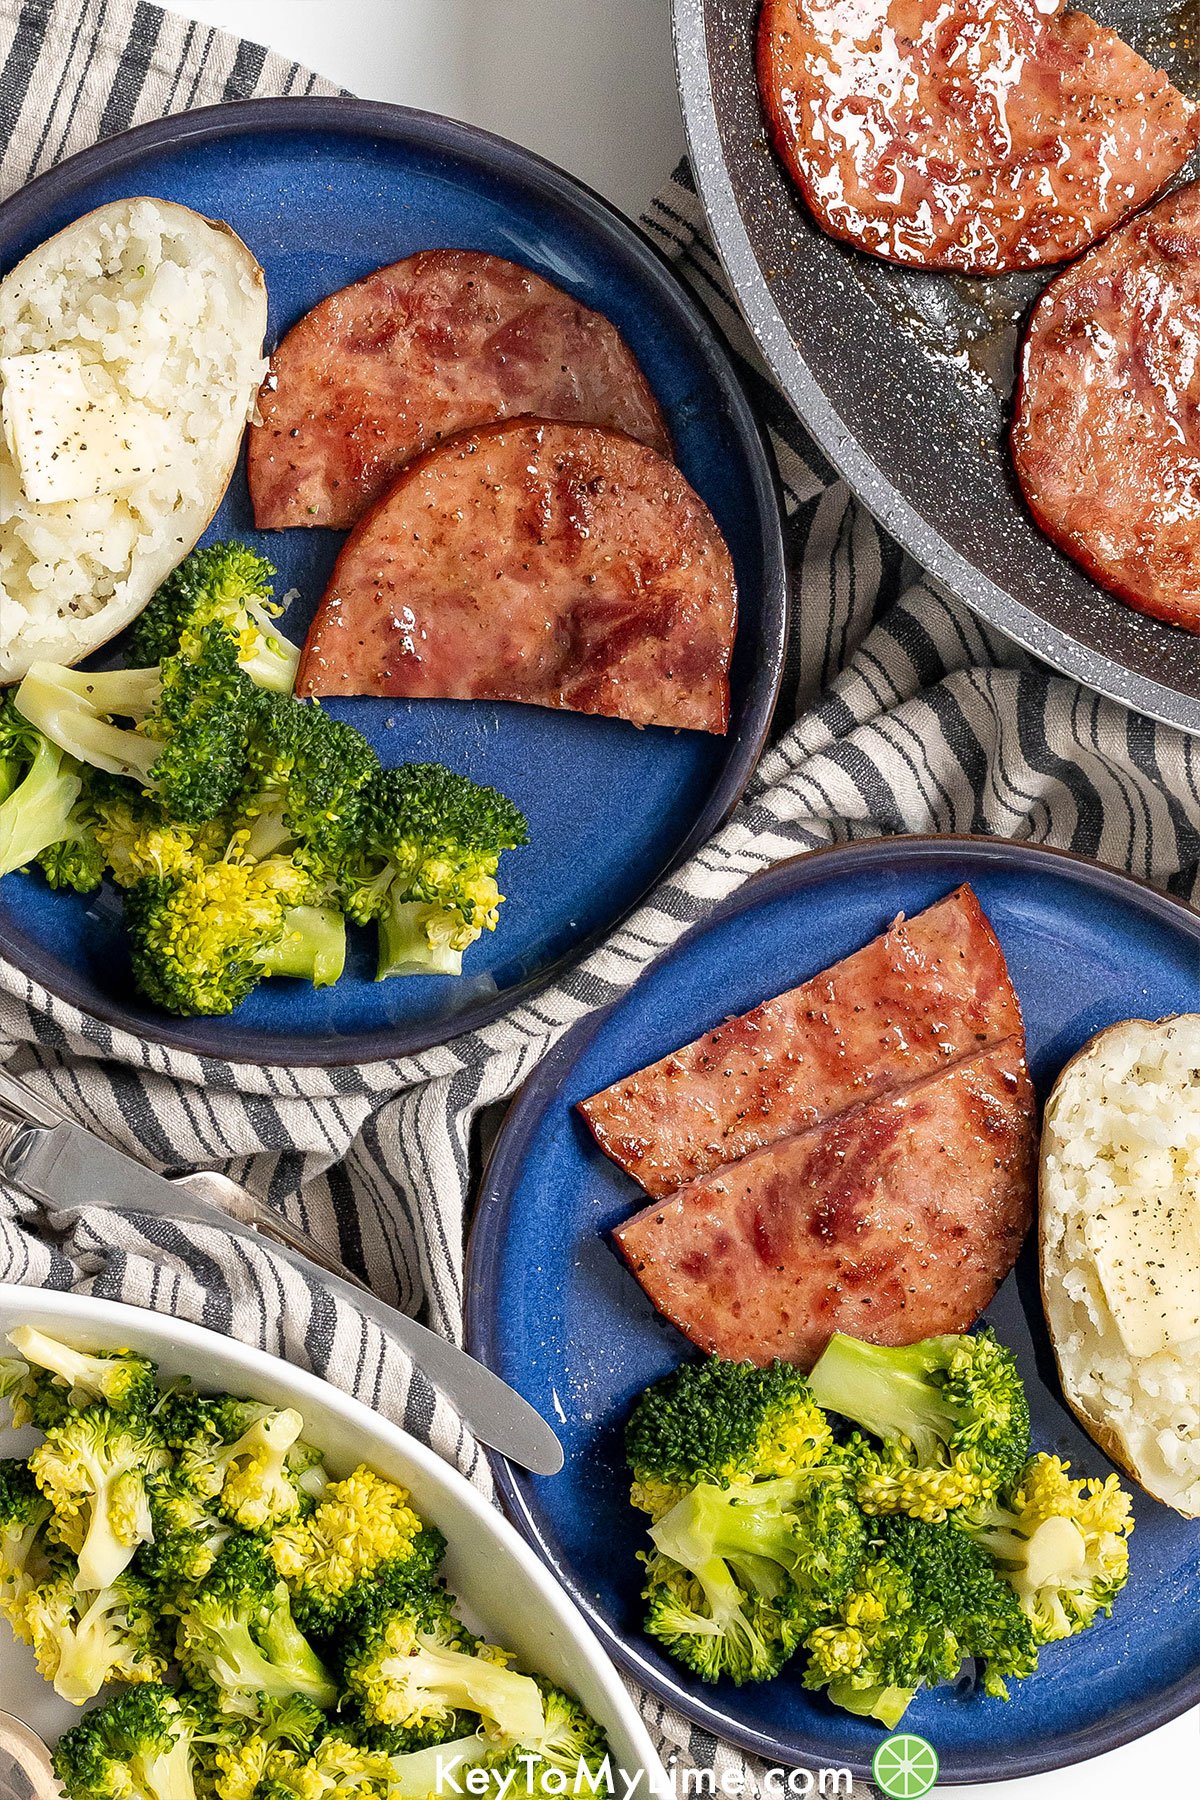 A couple of large dinner plates with ham steak, steamed broccoli, and a baked potato on top of a napkin.